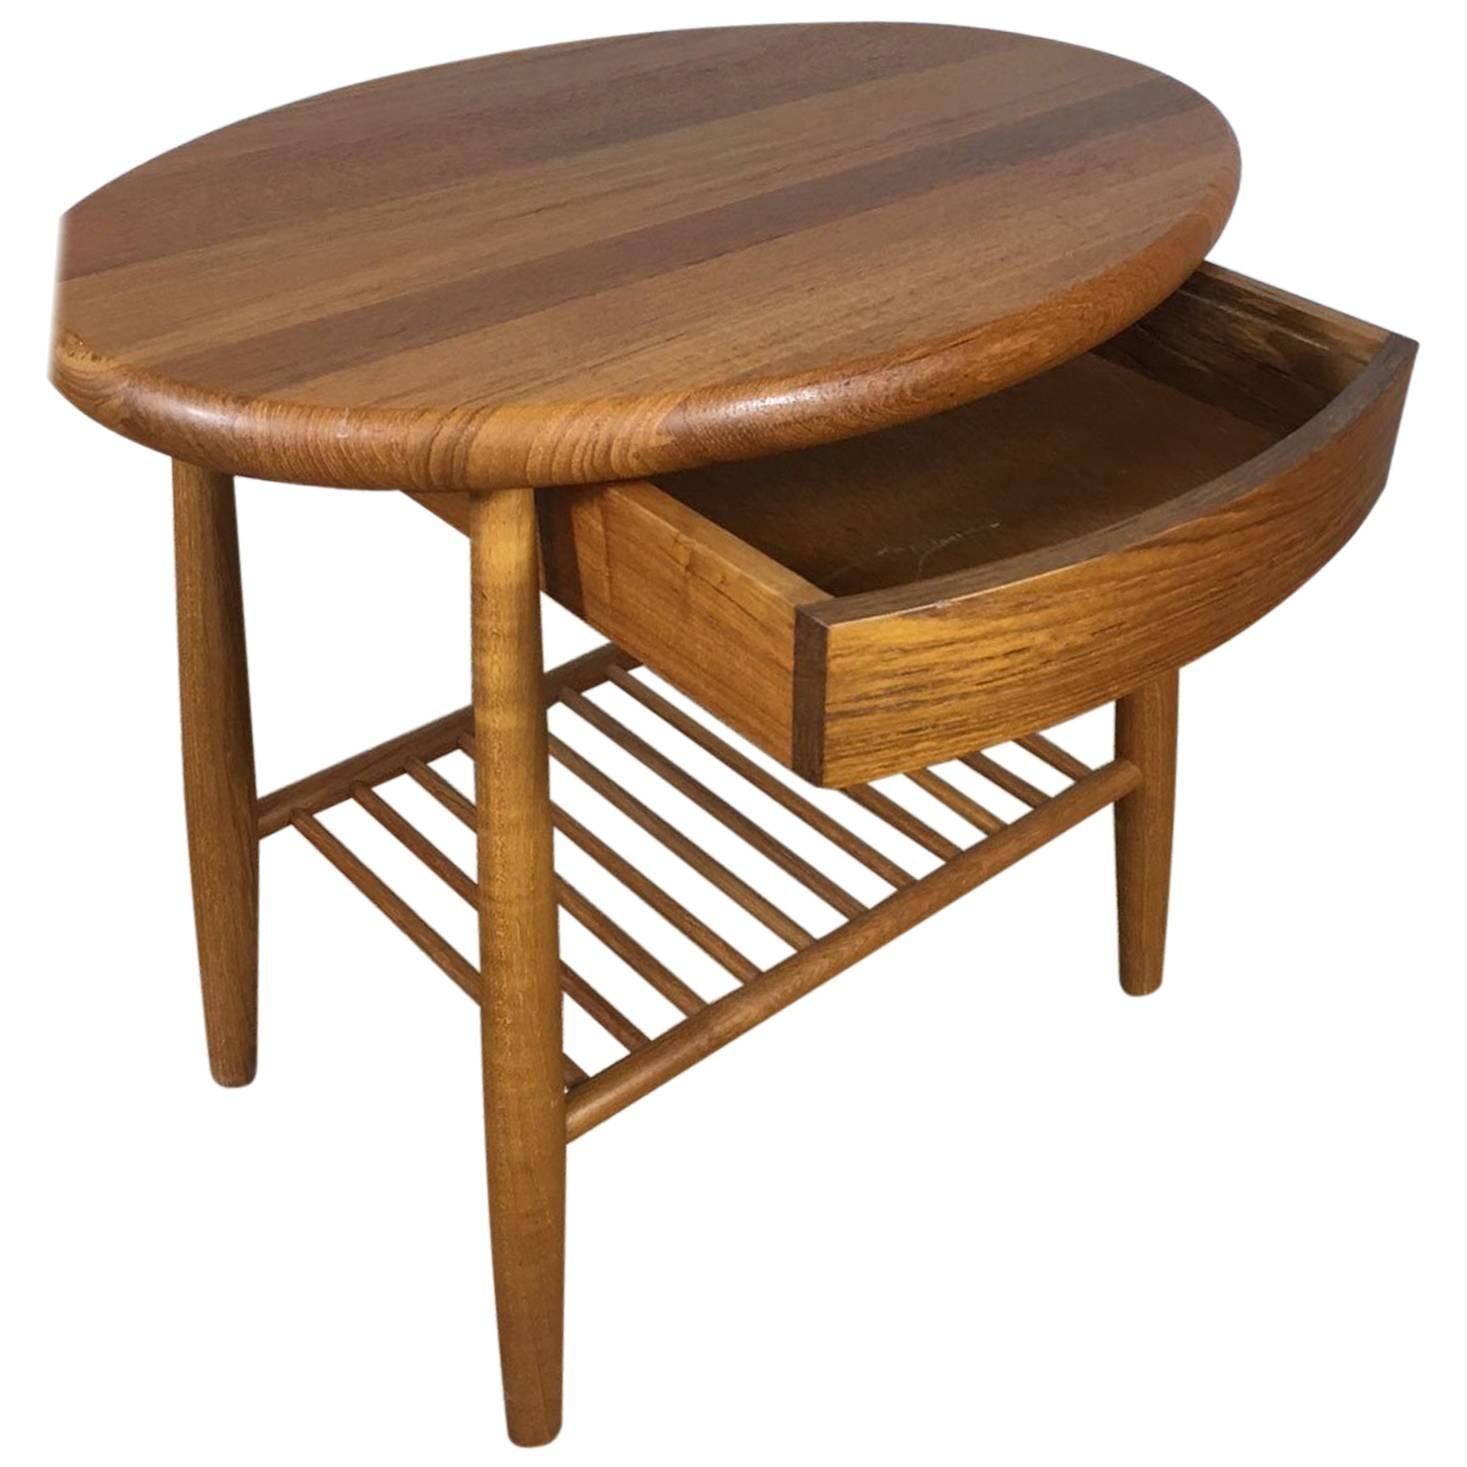 Solid Teak Side Table with Drawer and Magazine Shelf